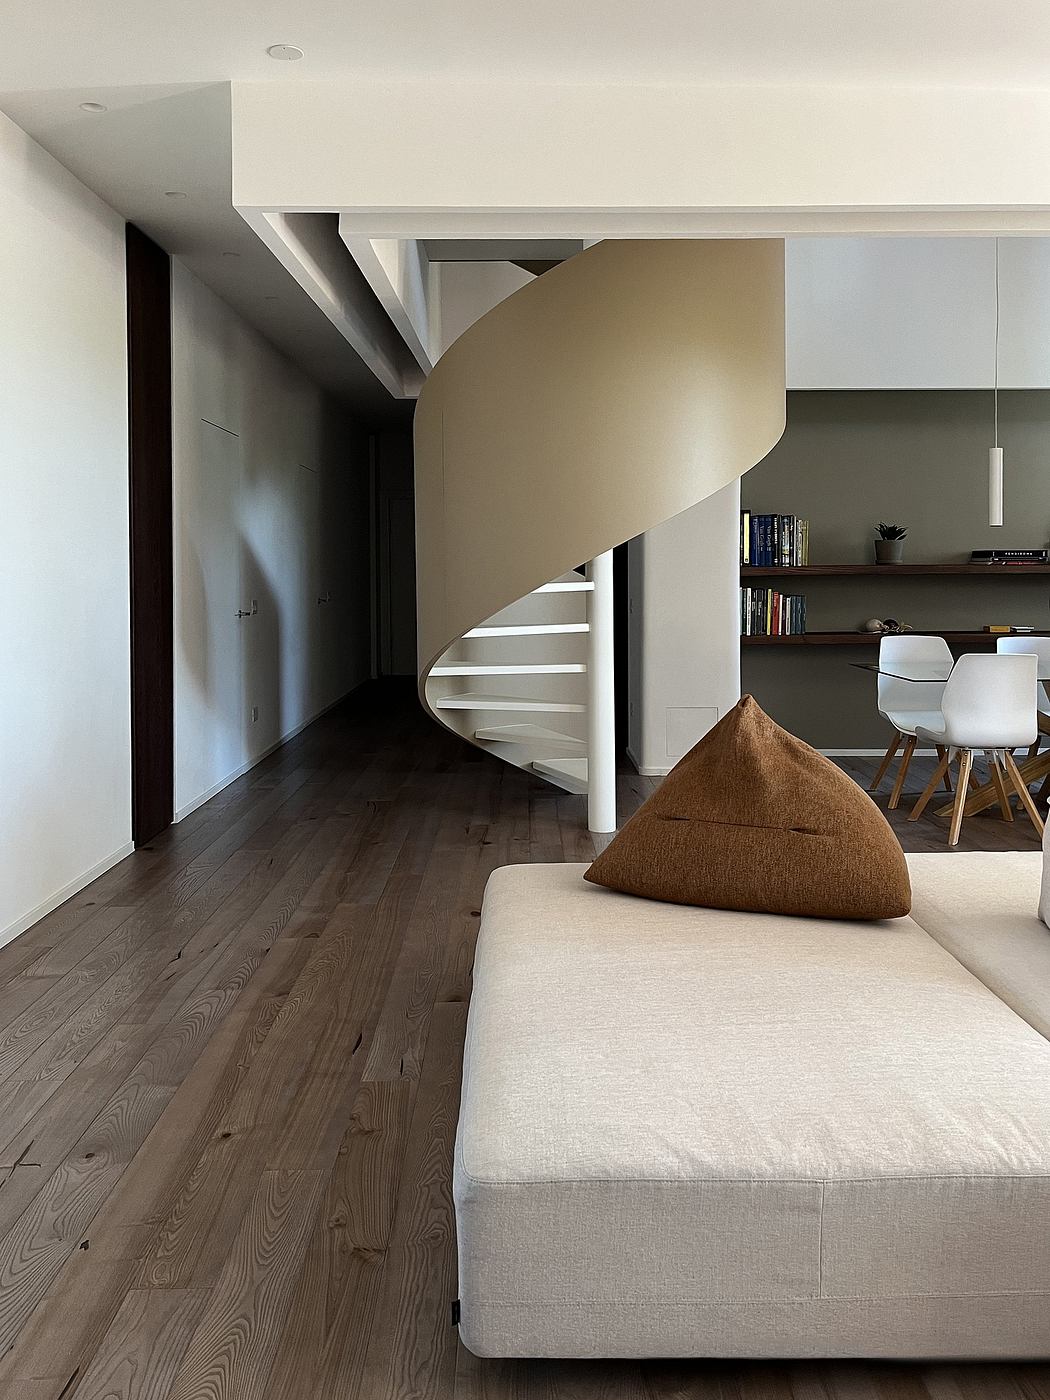 A modern, open-concept living space with a spiral staircase, built-in shelving, and minimal decor.